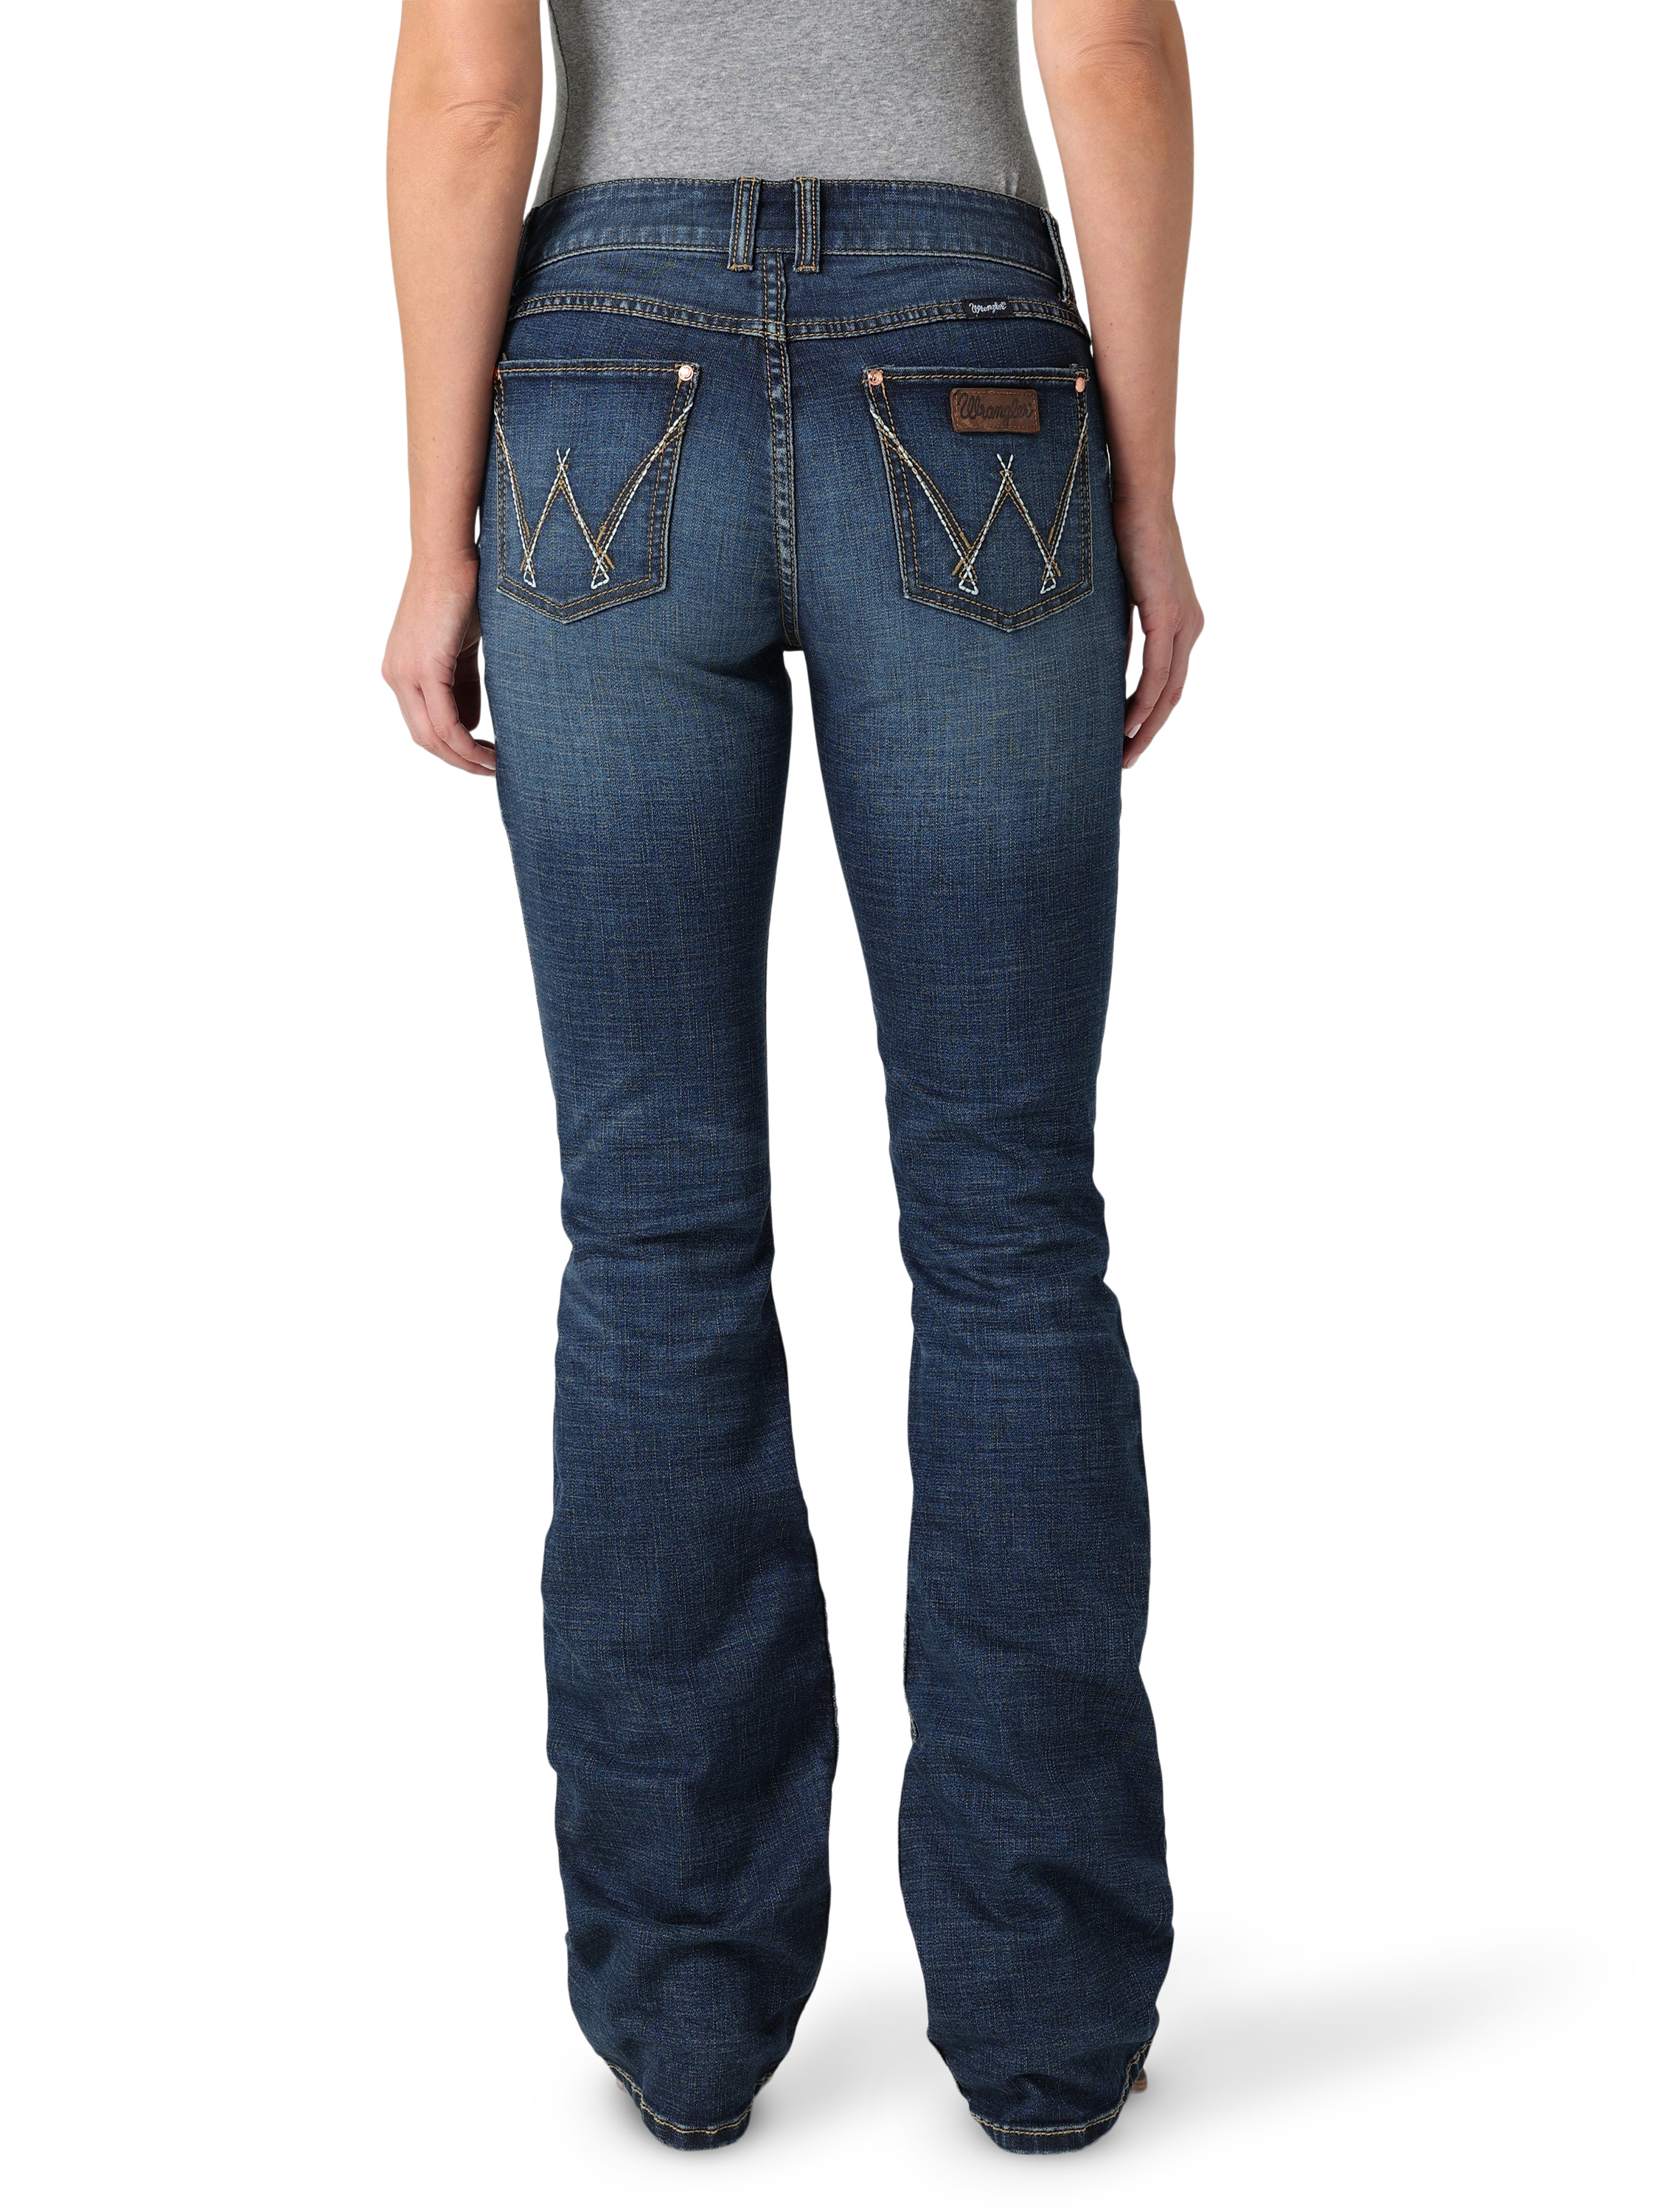 Wrangler® Women's Retro Mae Bootcut Jean with Stretch Fabric - image 2 of 6